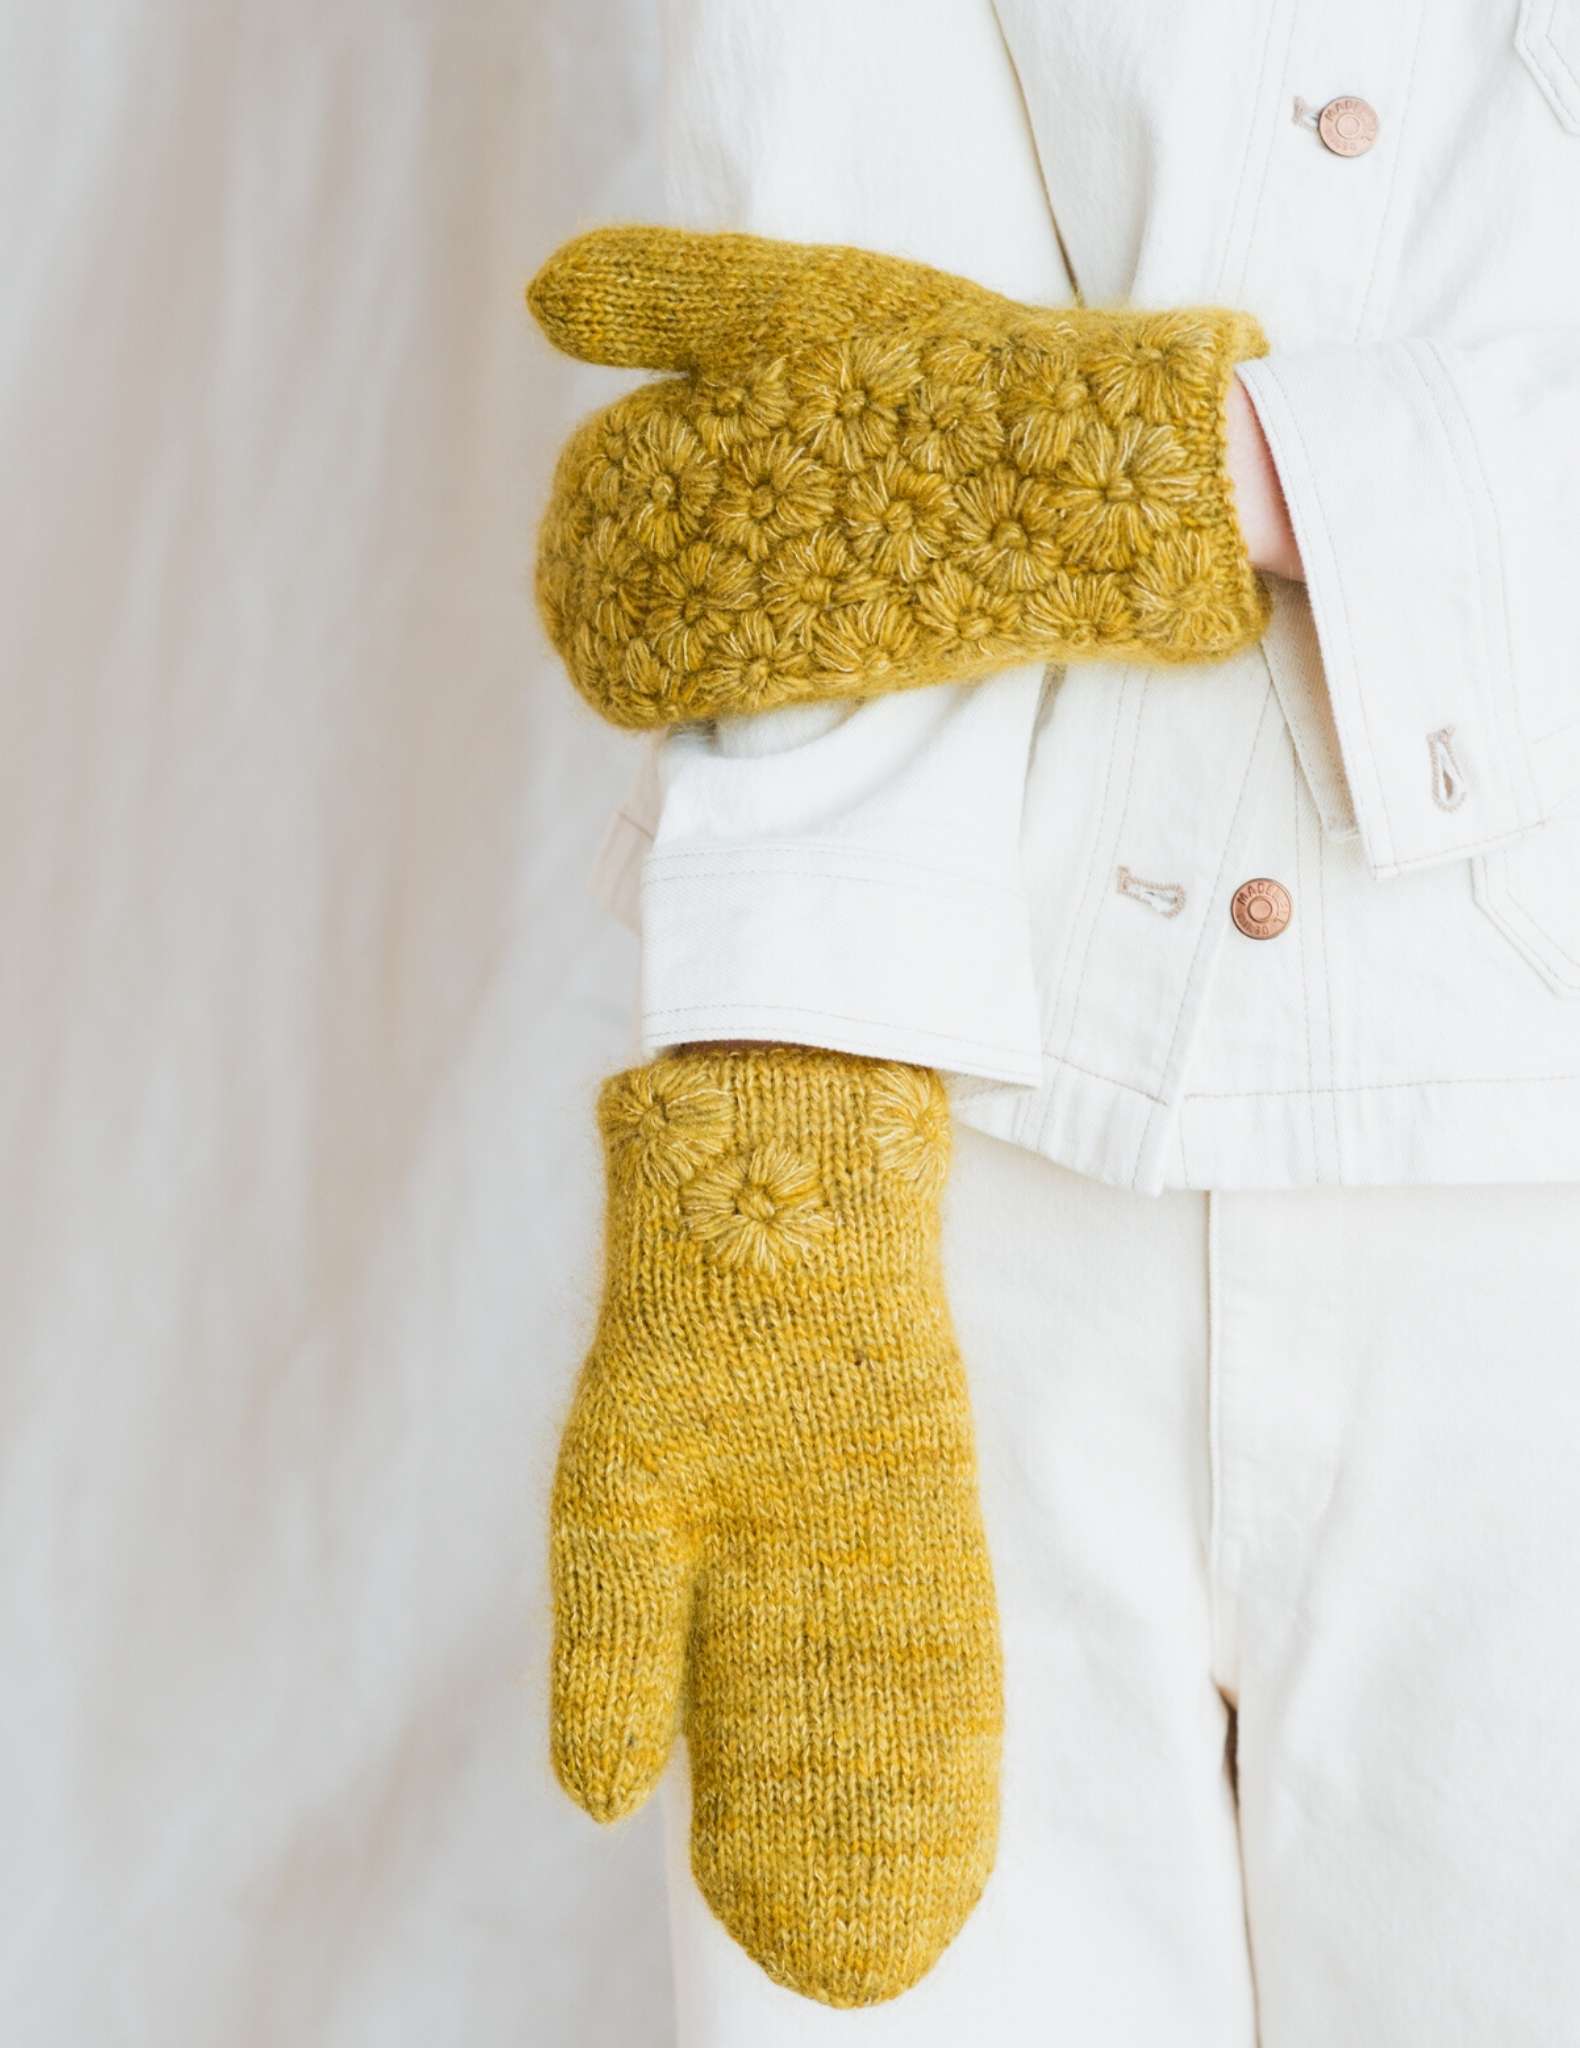 A pair of mittens are worn by a model wearing white, one arm is behind held straight down with palm side up, the other hand is resting on the straight arm, showing the detailed back of the yellow mitten